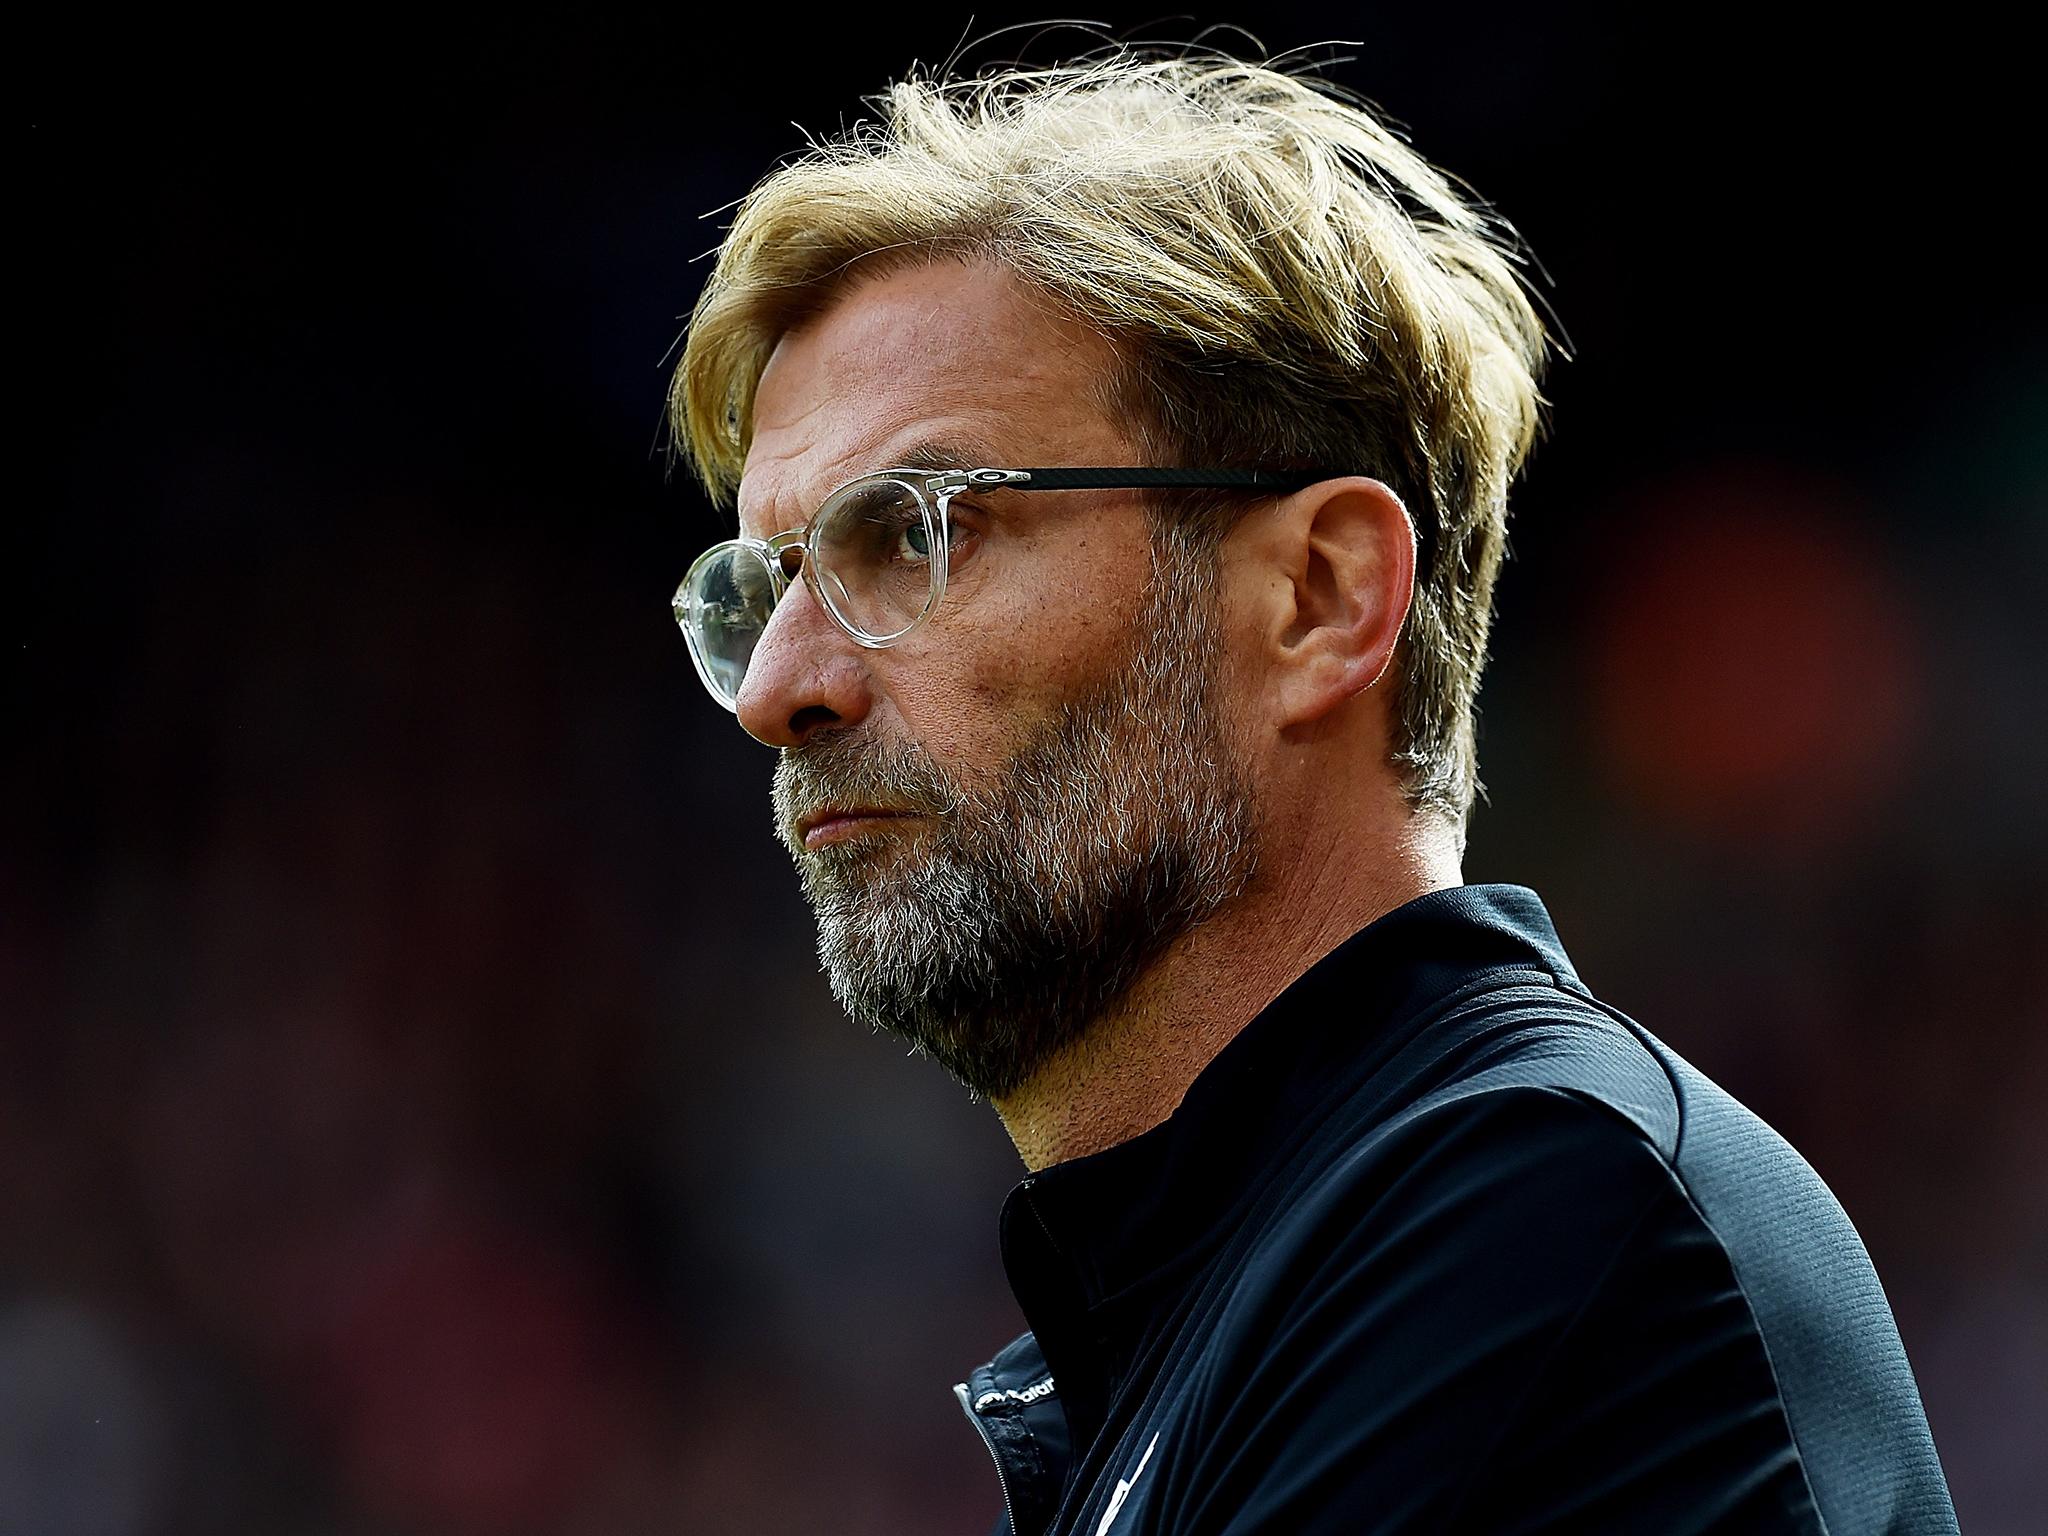 Jürgen Klopp could renew his Liverpool transfer plans when the January window opens